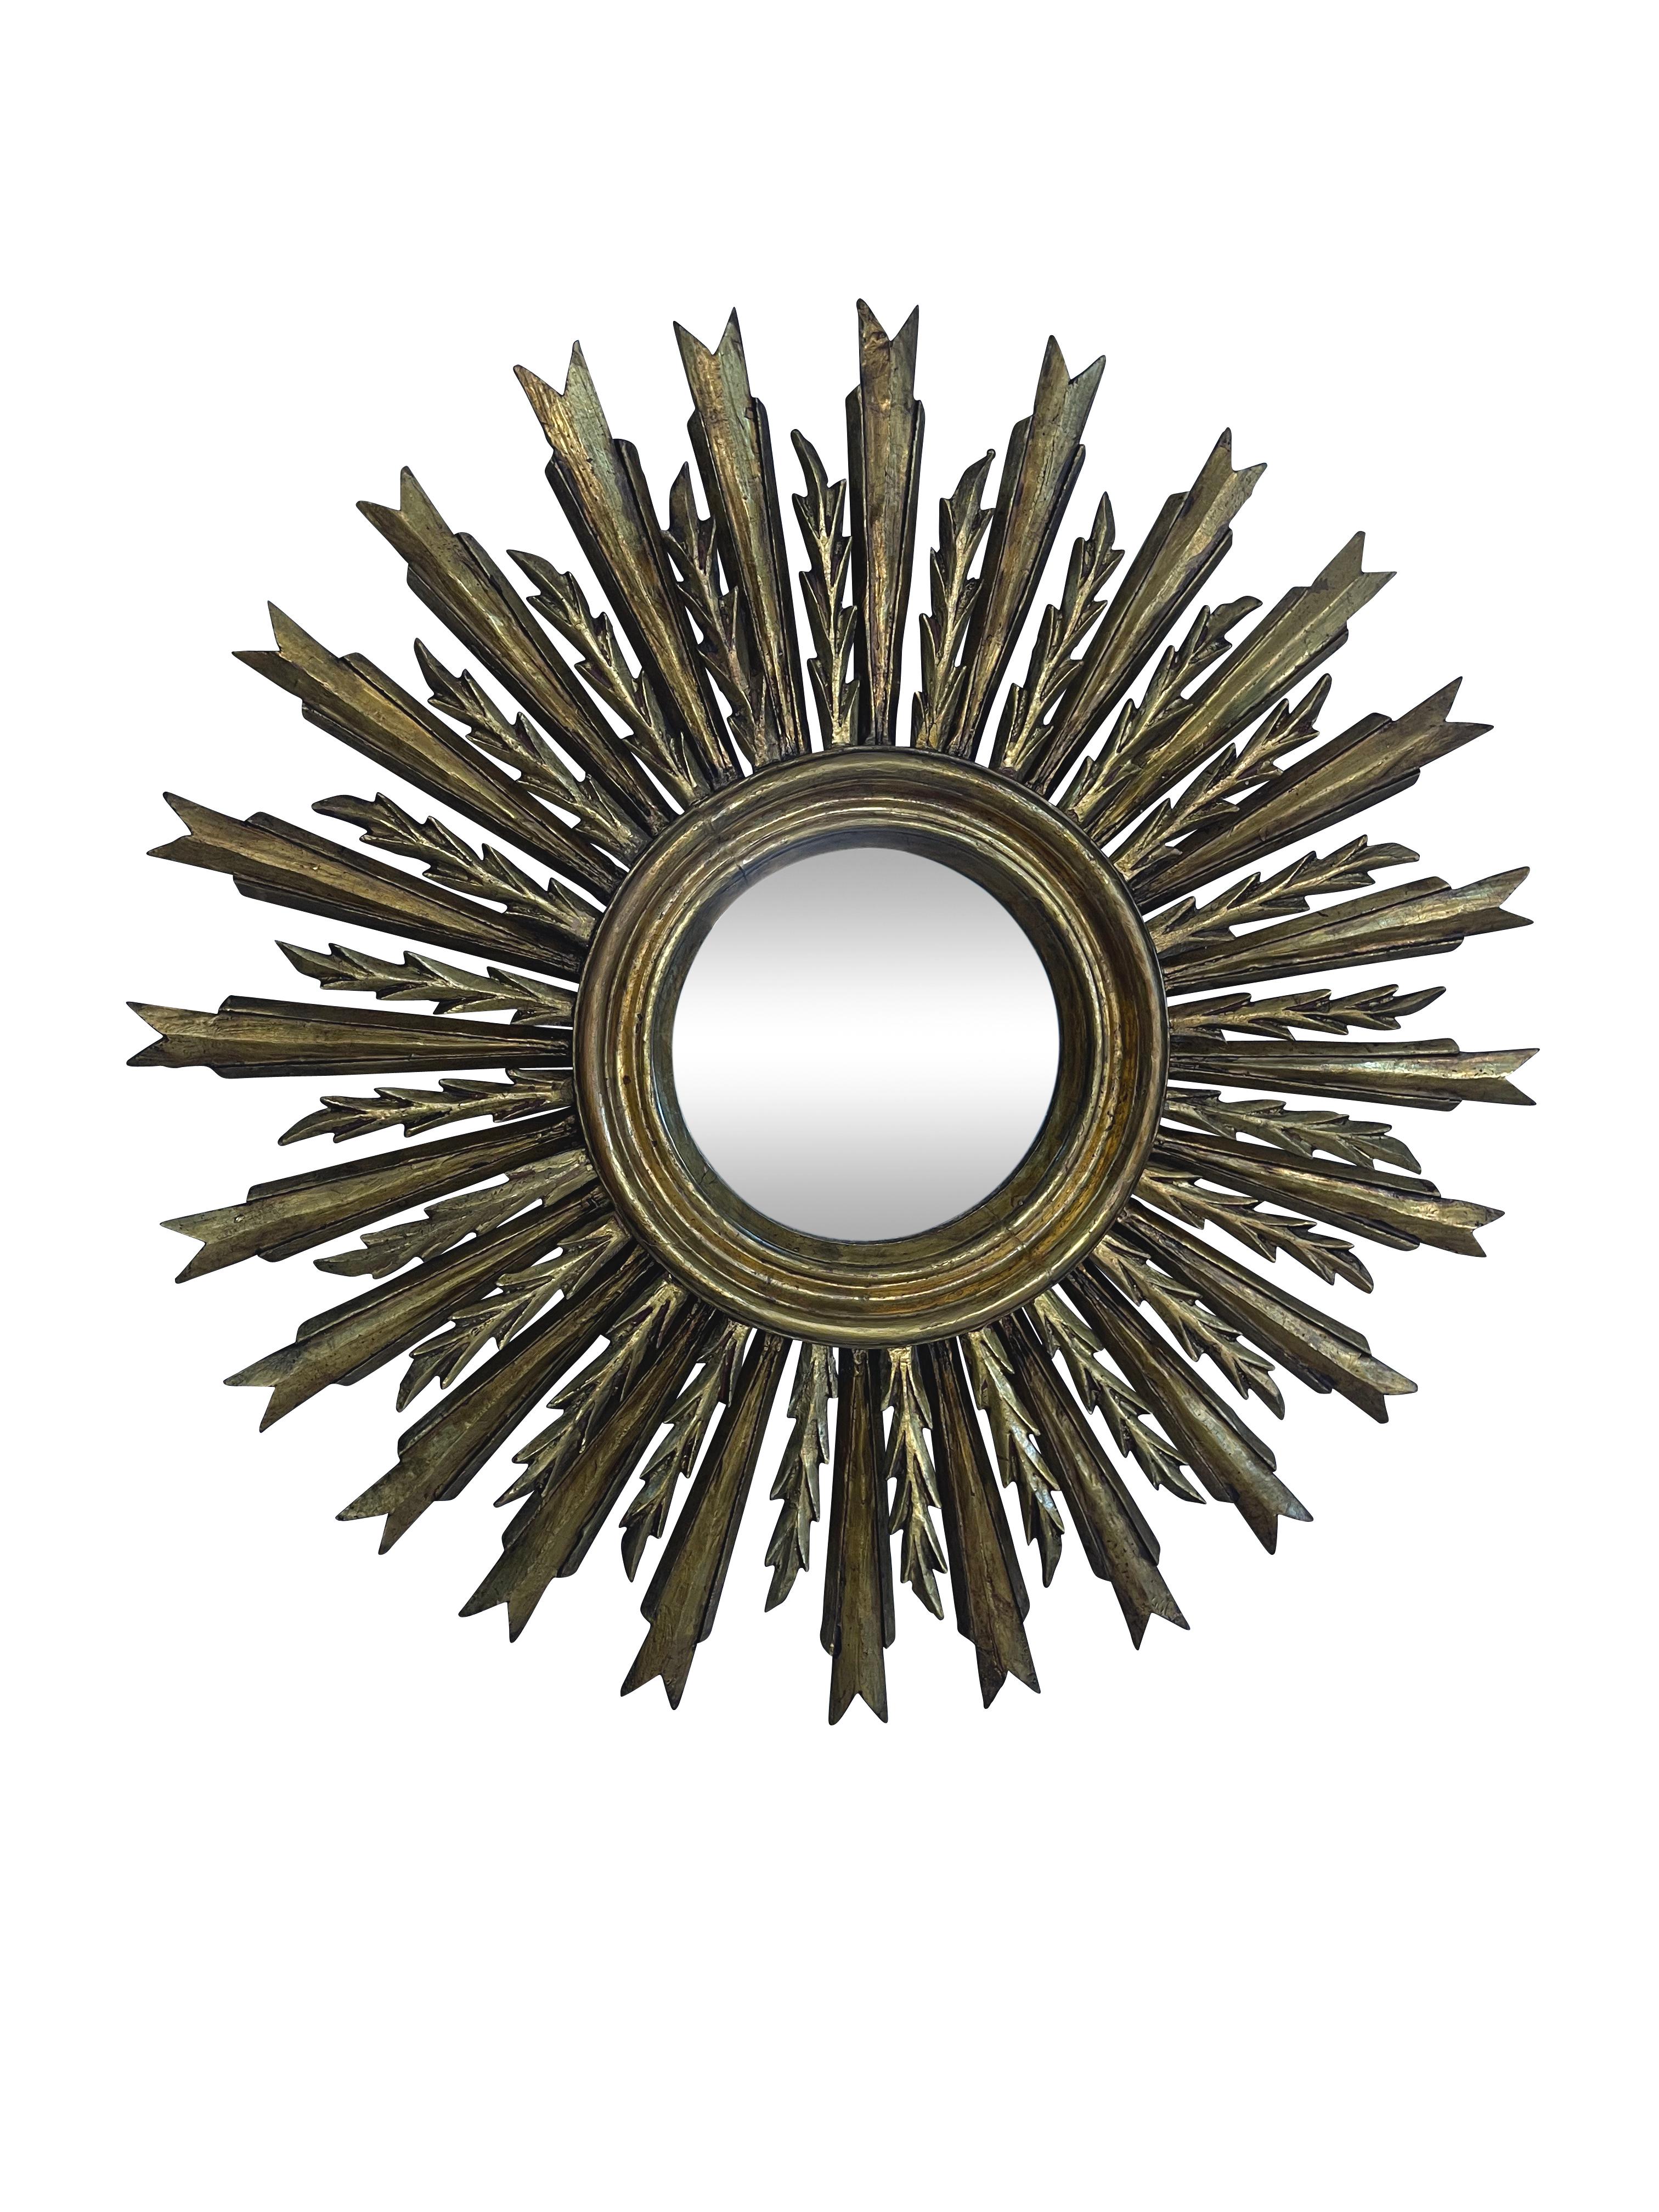 A lovely French gilt sunburst (or starburst) mirror with a double row of gilded wooden rays arranged around the original glass mirror plate's center. New glass. Beautiful aged patina and original gold leaf gilding. It will add a luxurious but strong